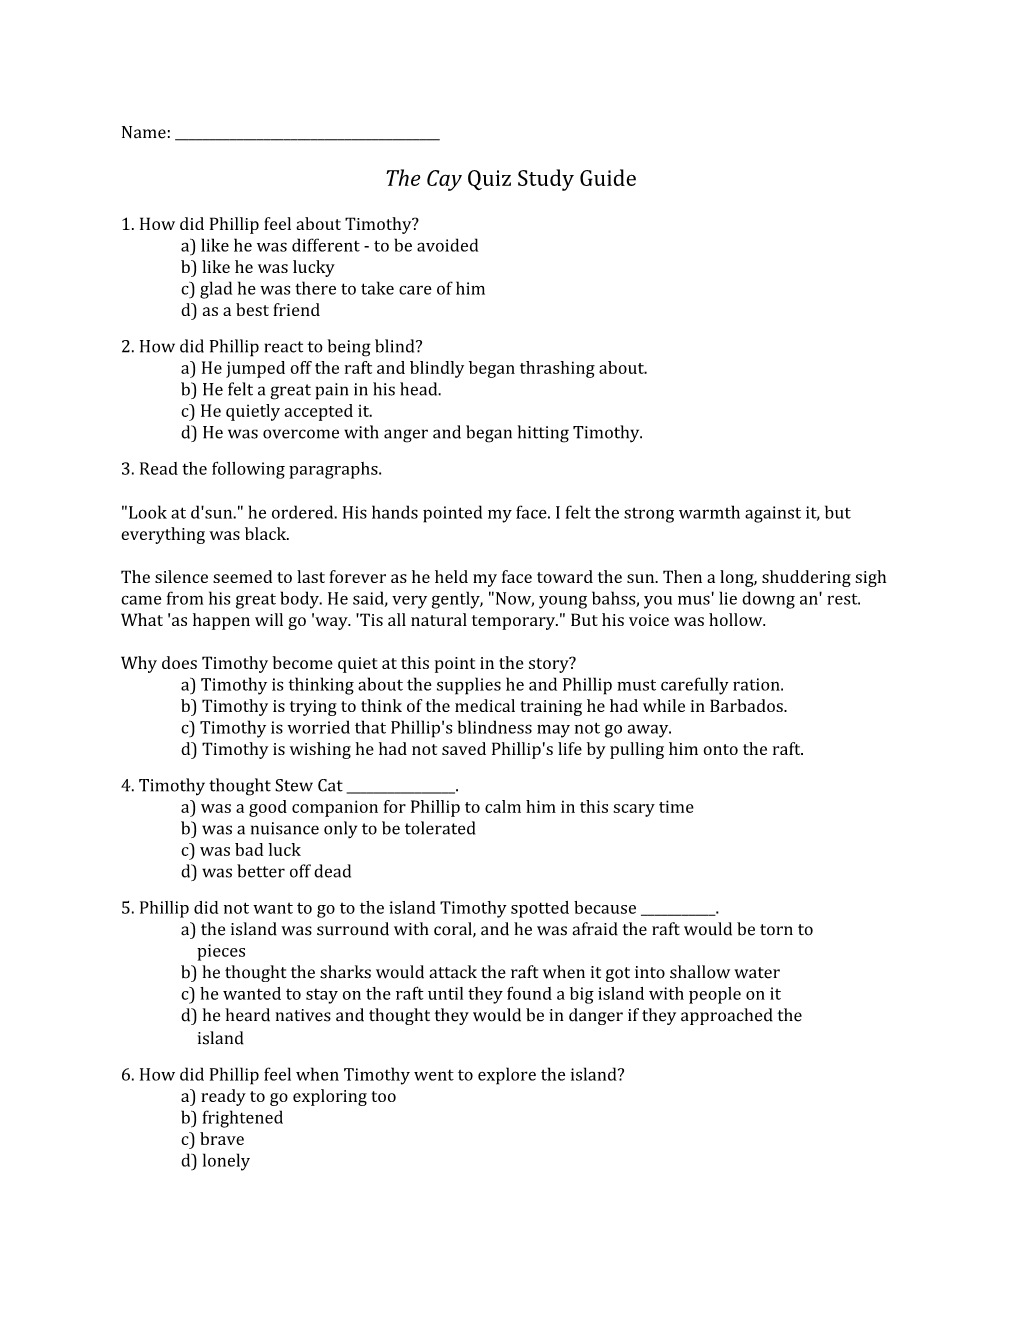 The Cay Quiz Study Guide